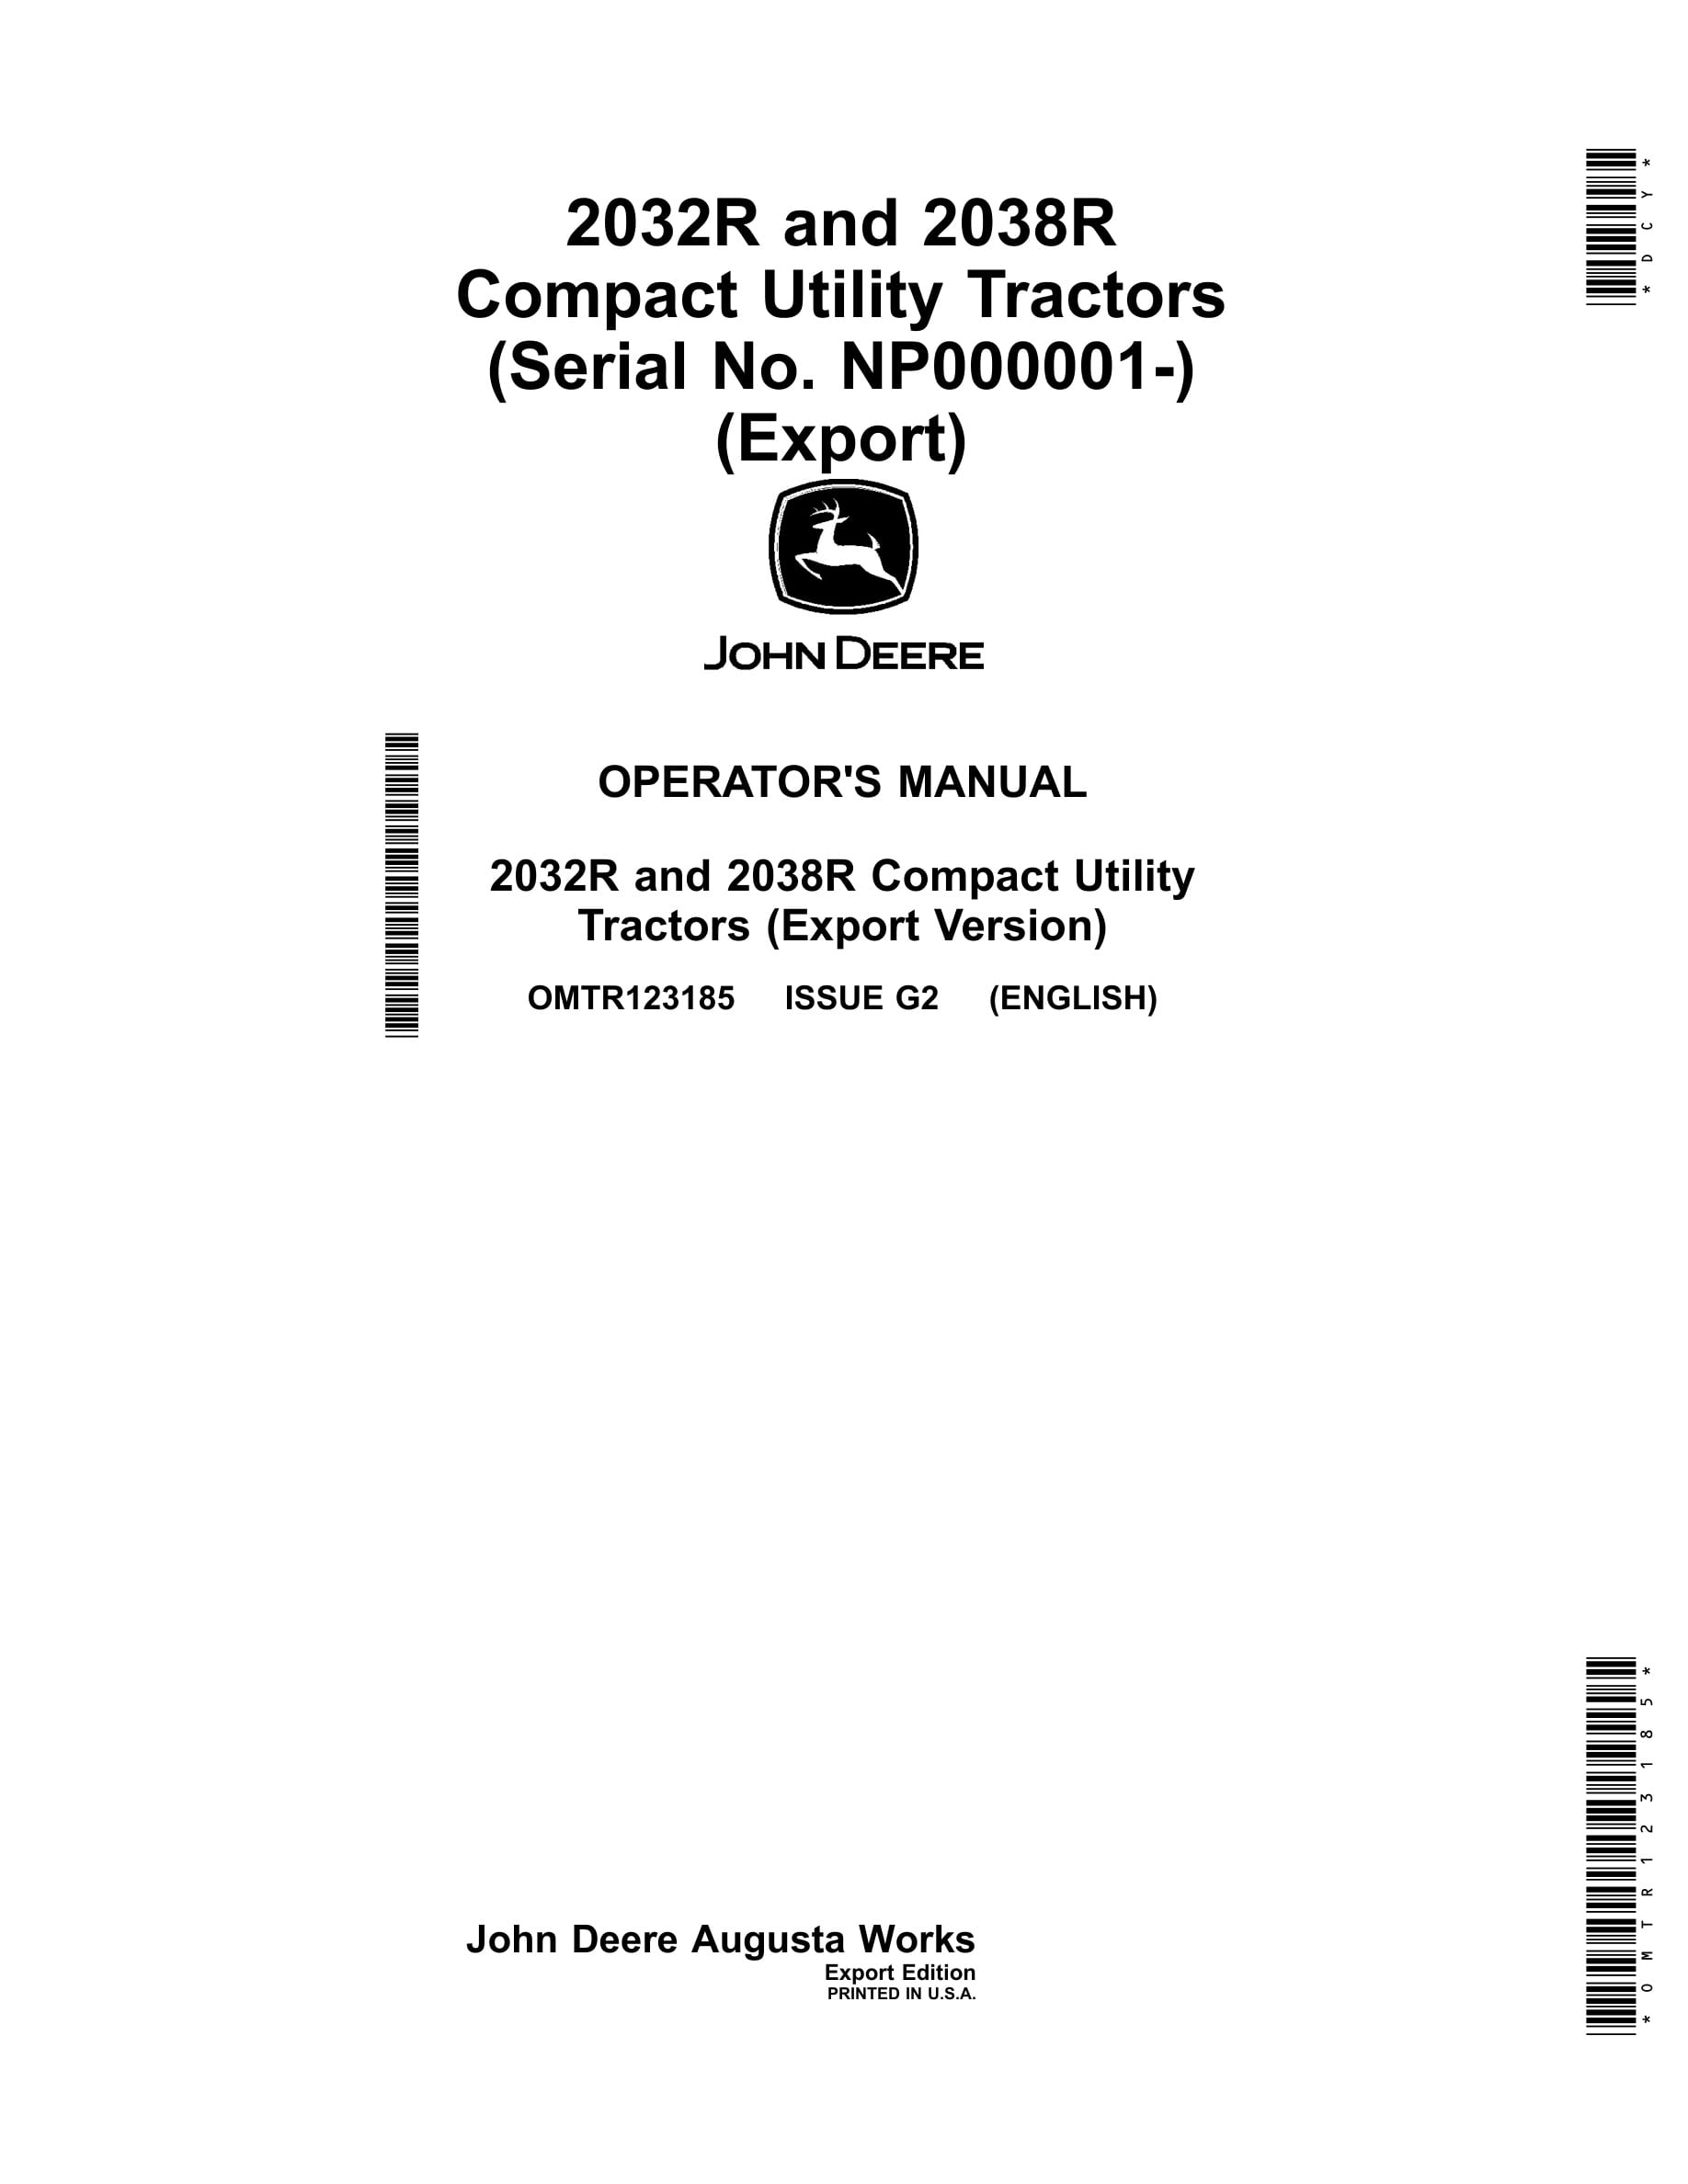 John Deere 2032r And 2038r Compact Utility Tractors Operator Manuals OMTR123185-1